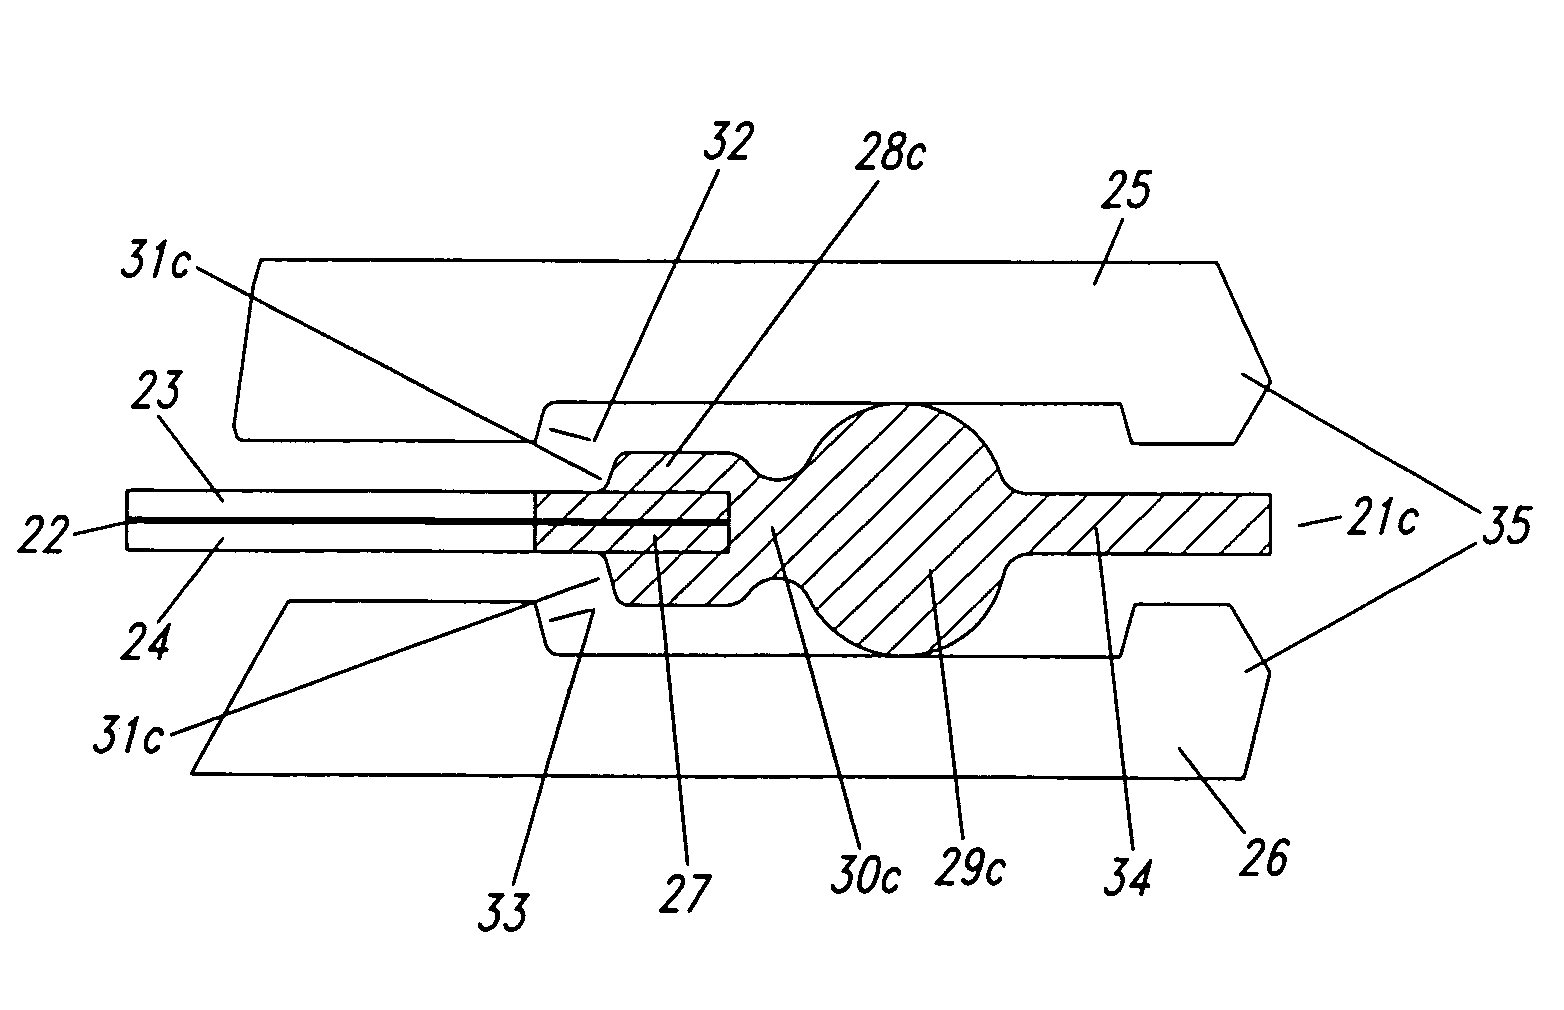 Membrane electrode assembly with integrated seal